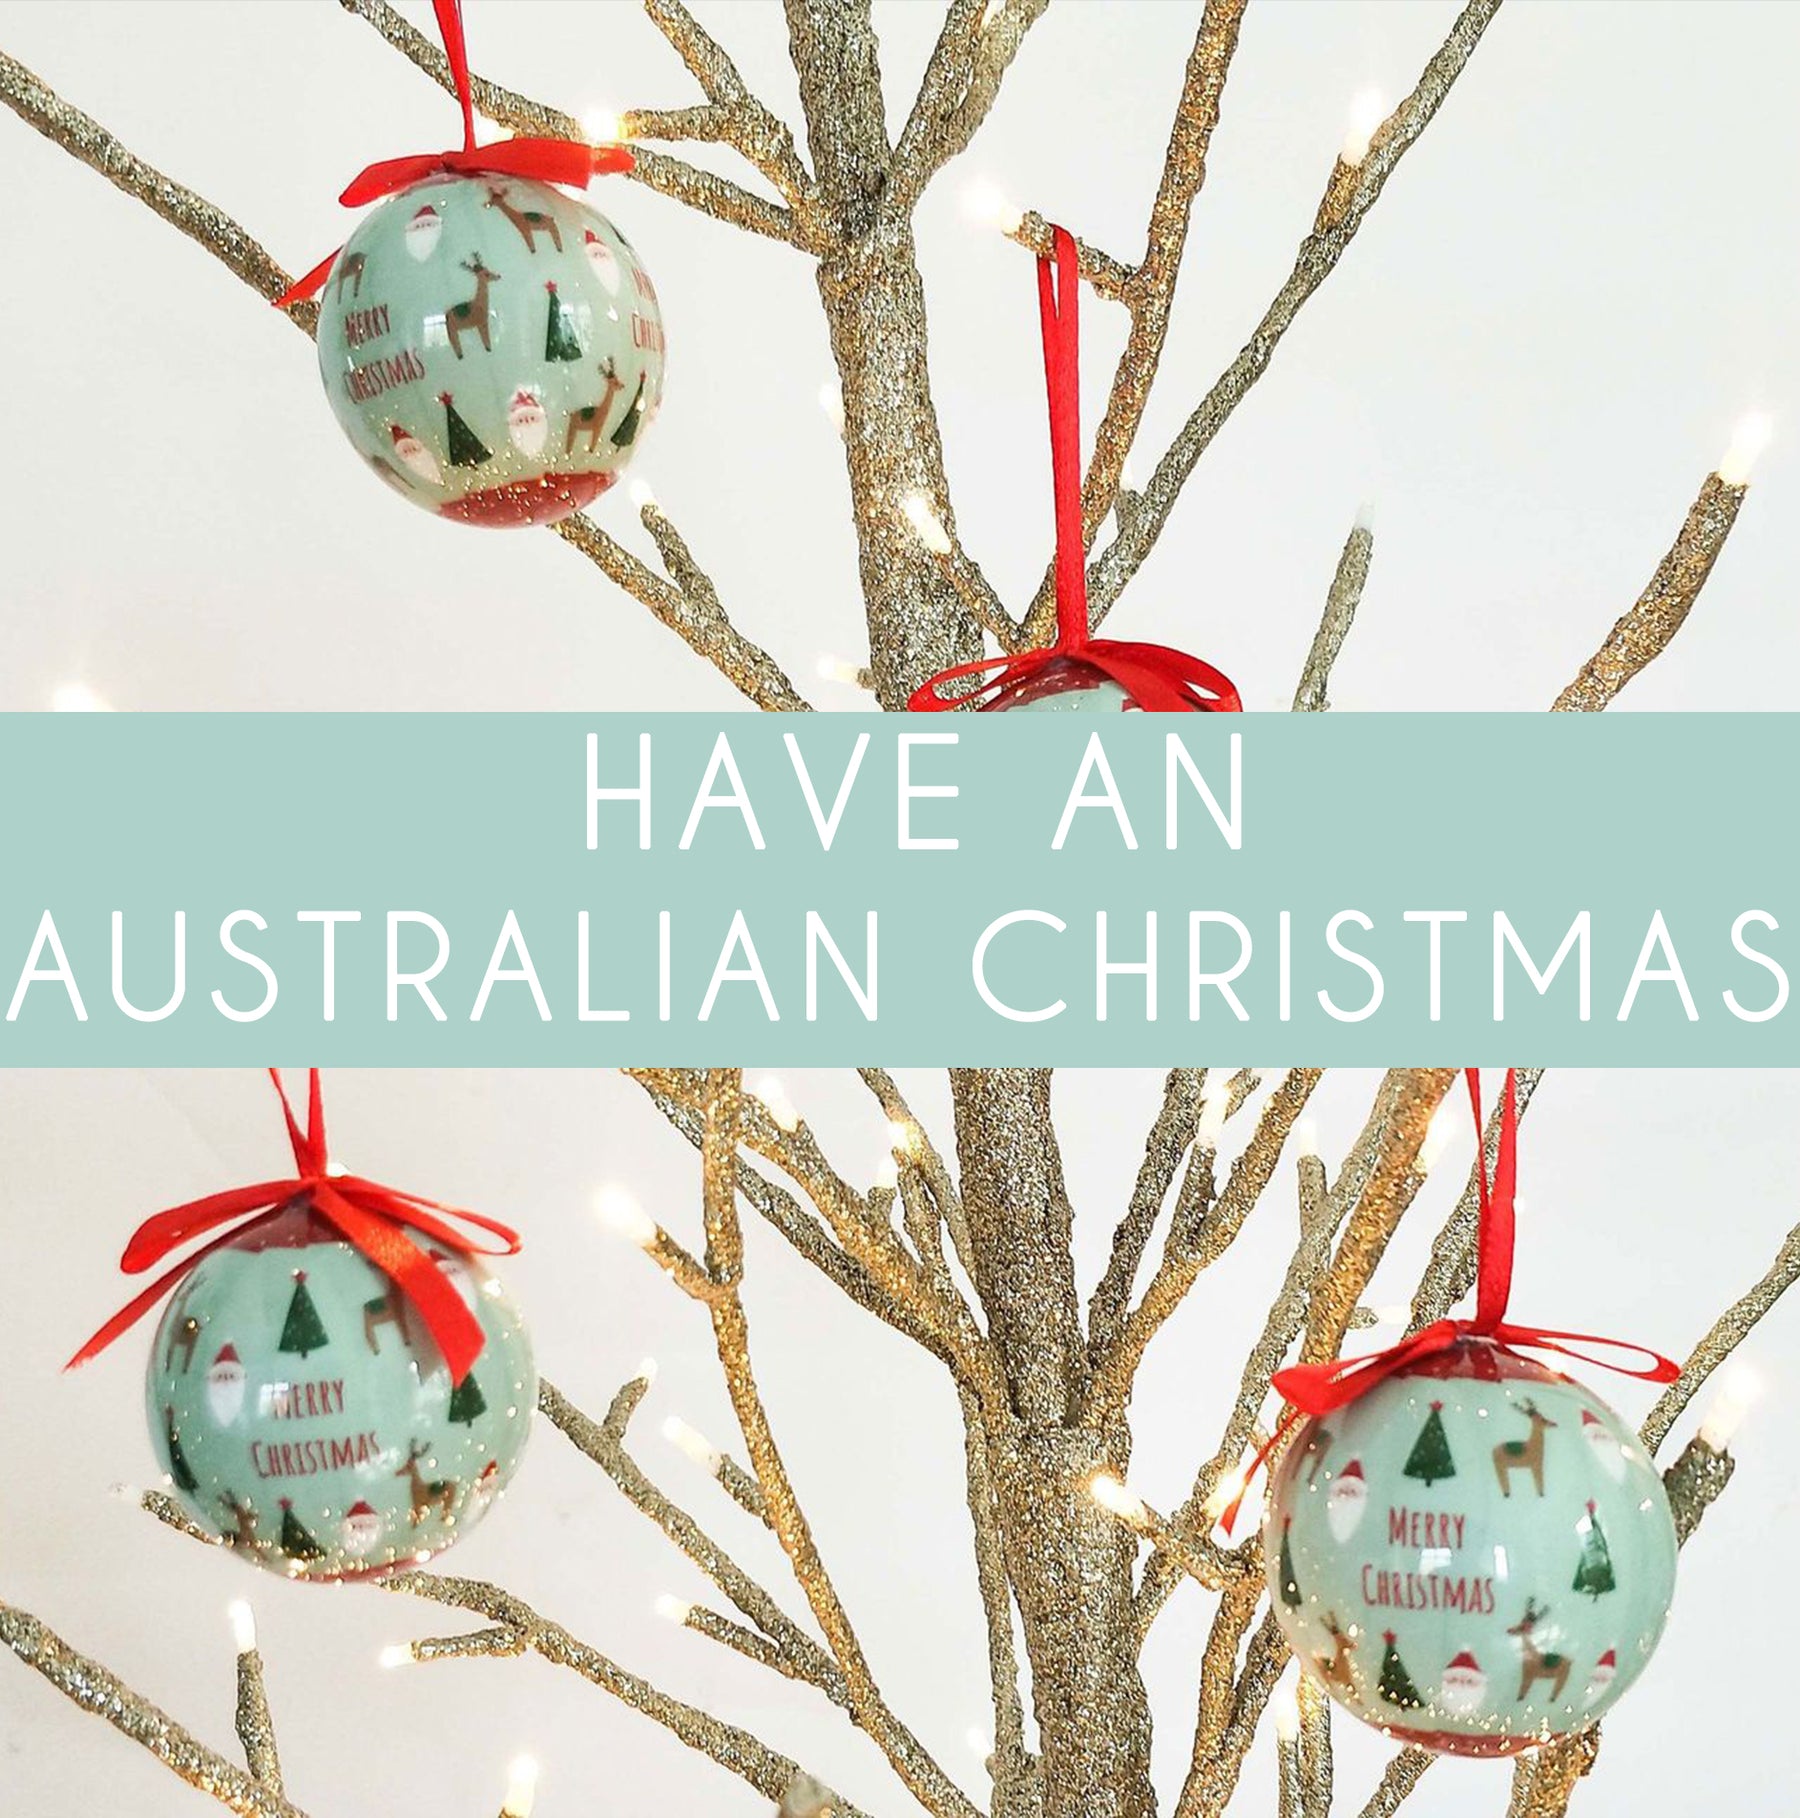 Decorations for an Aussie Christmas!